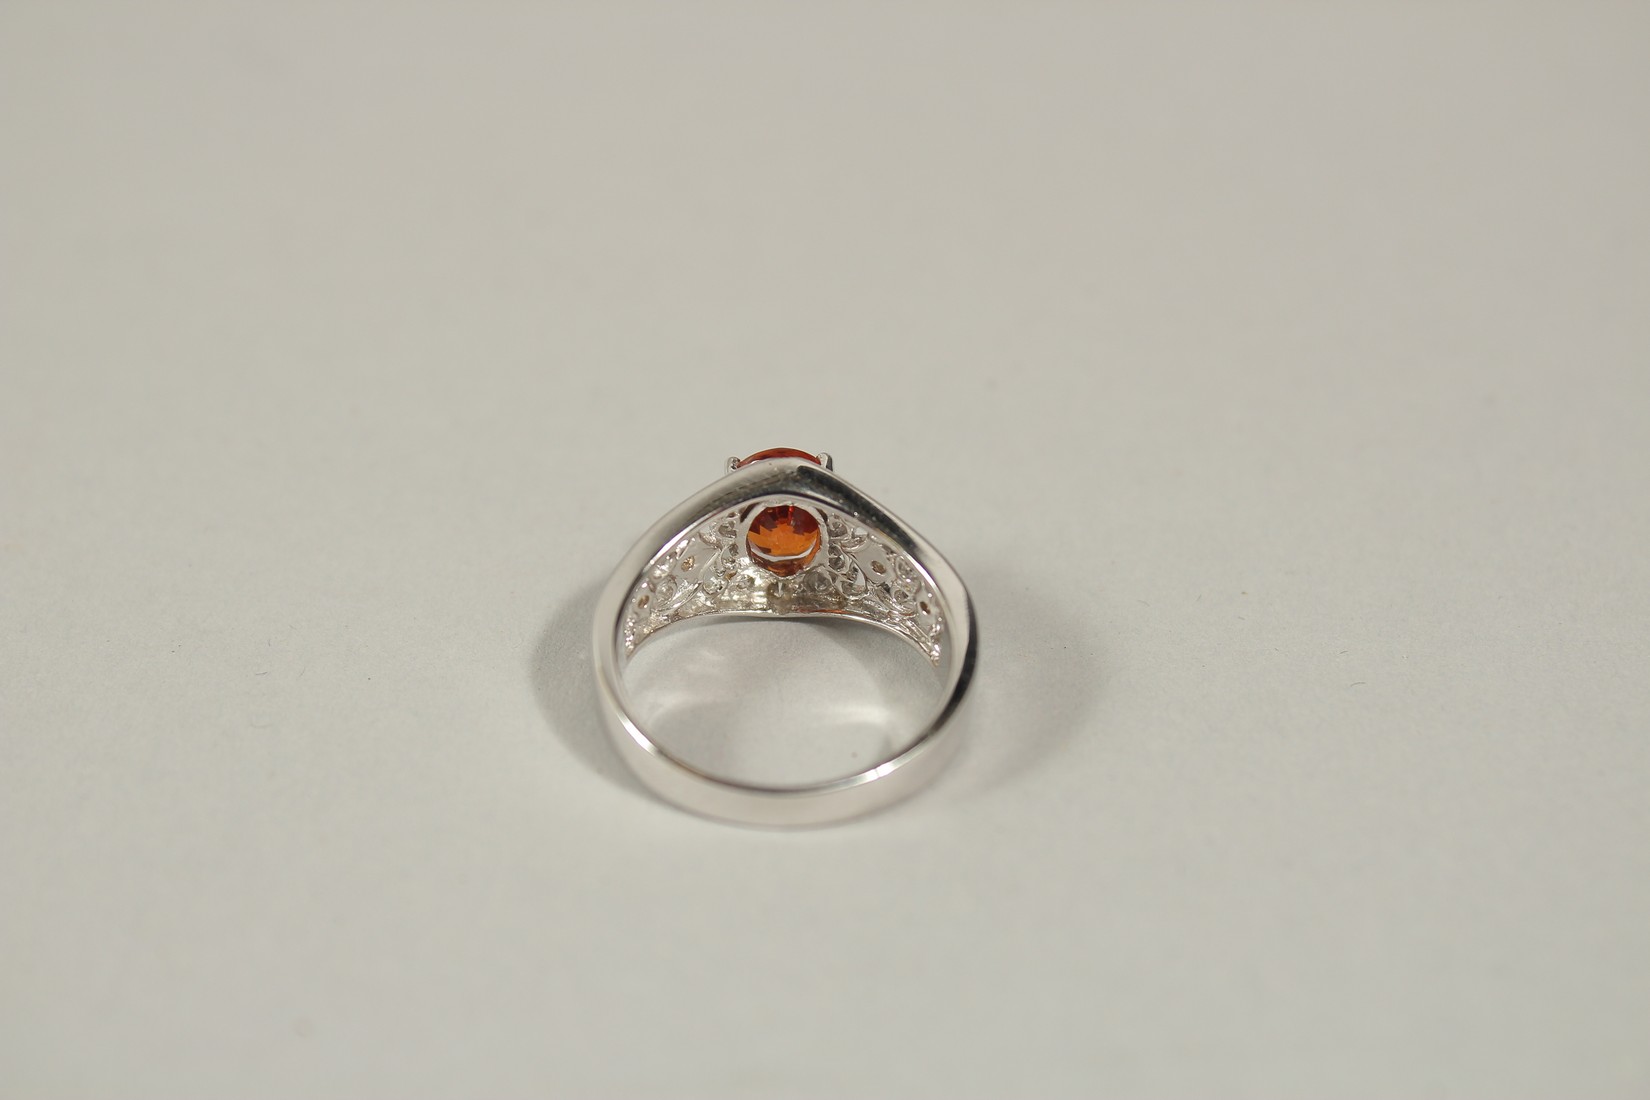 AN 18CT WHITE GOLD, DIAMOND AND ORANGE SAPPHIRE RING, size N. - Image 2 of 2